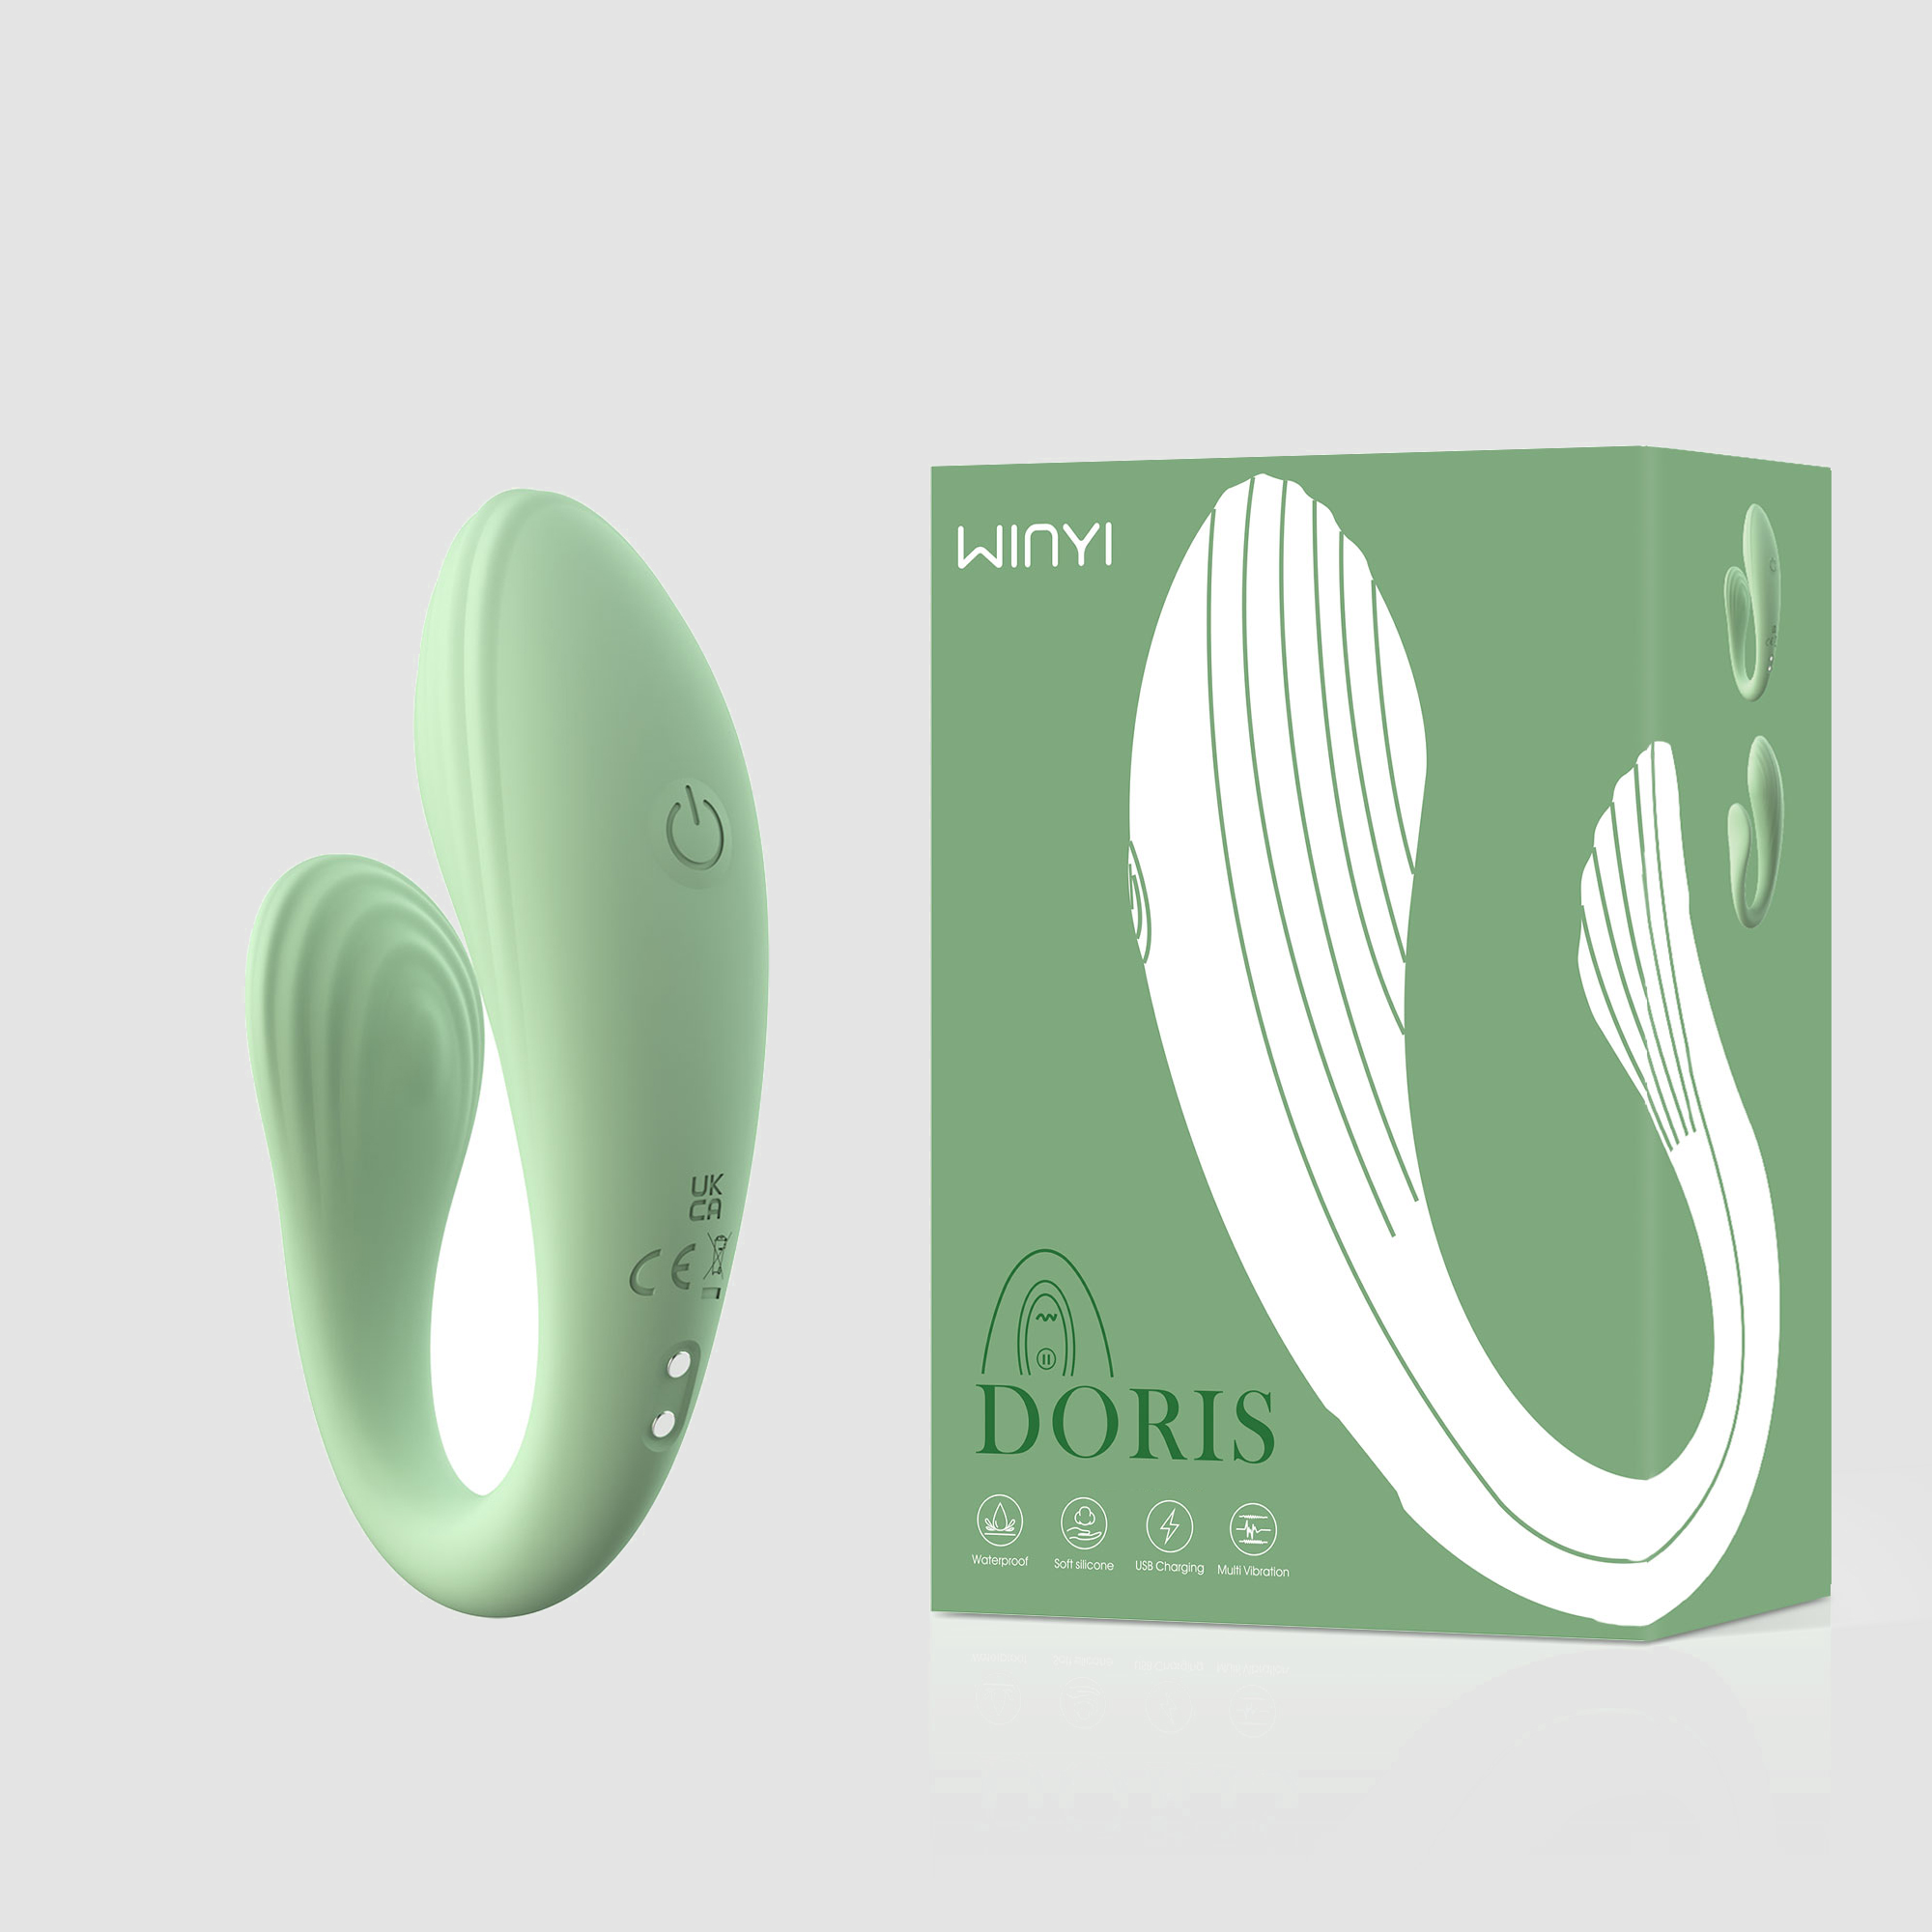 WY0614-Doris-wireless wearable App Controlled Couple Vibrator manufacturer-OEM ODM service available factory-Wide Range Of Quality Products-Industry-trusted Vendor-Private Label full customization-WINYI-Official Websiteszwinyi.com/winyi.net-2023 New Sex Toy